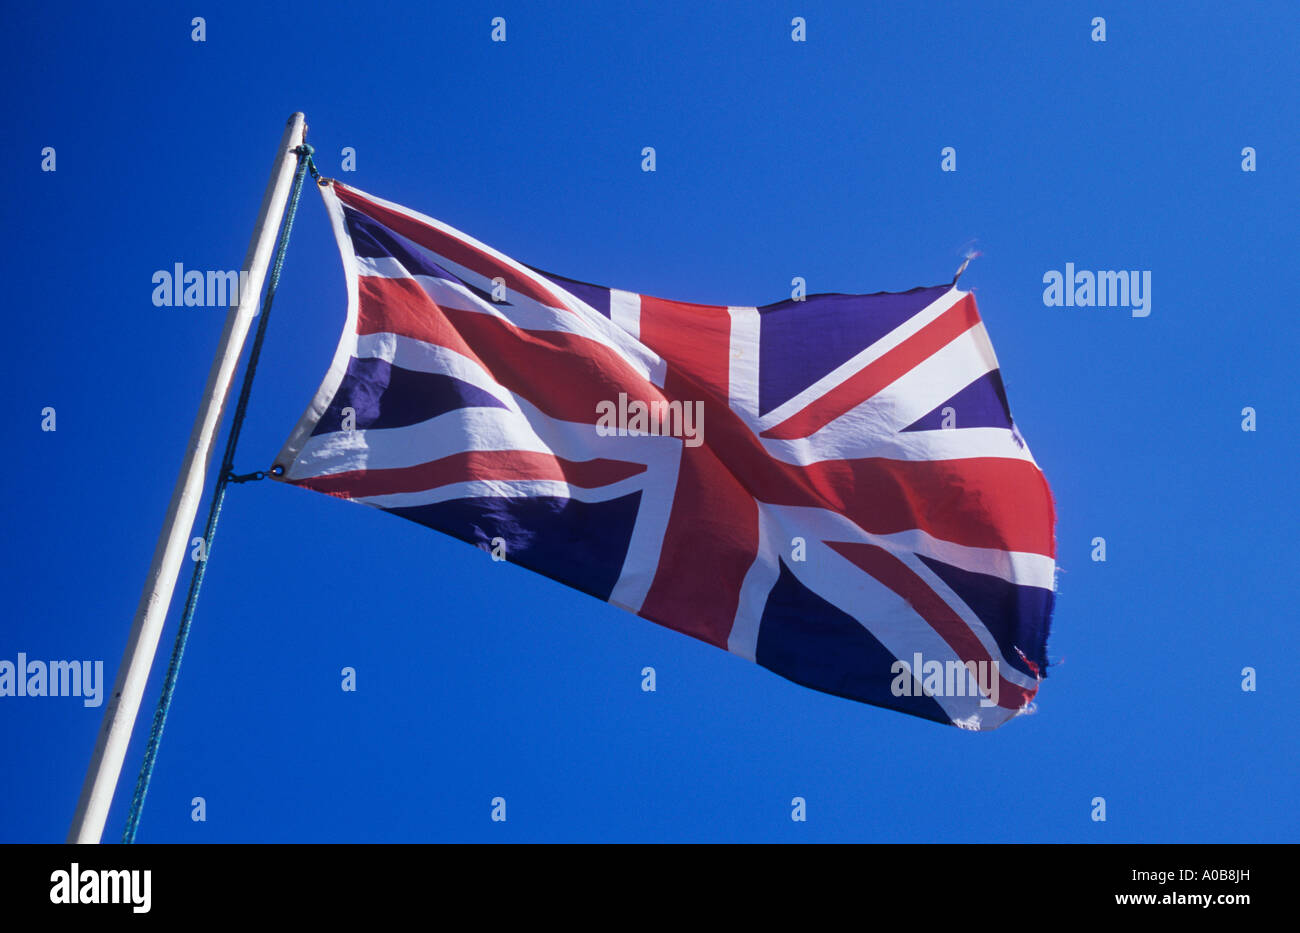 Union Jack flag fluttering from flagpole against clear blue sky Stock Photo